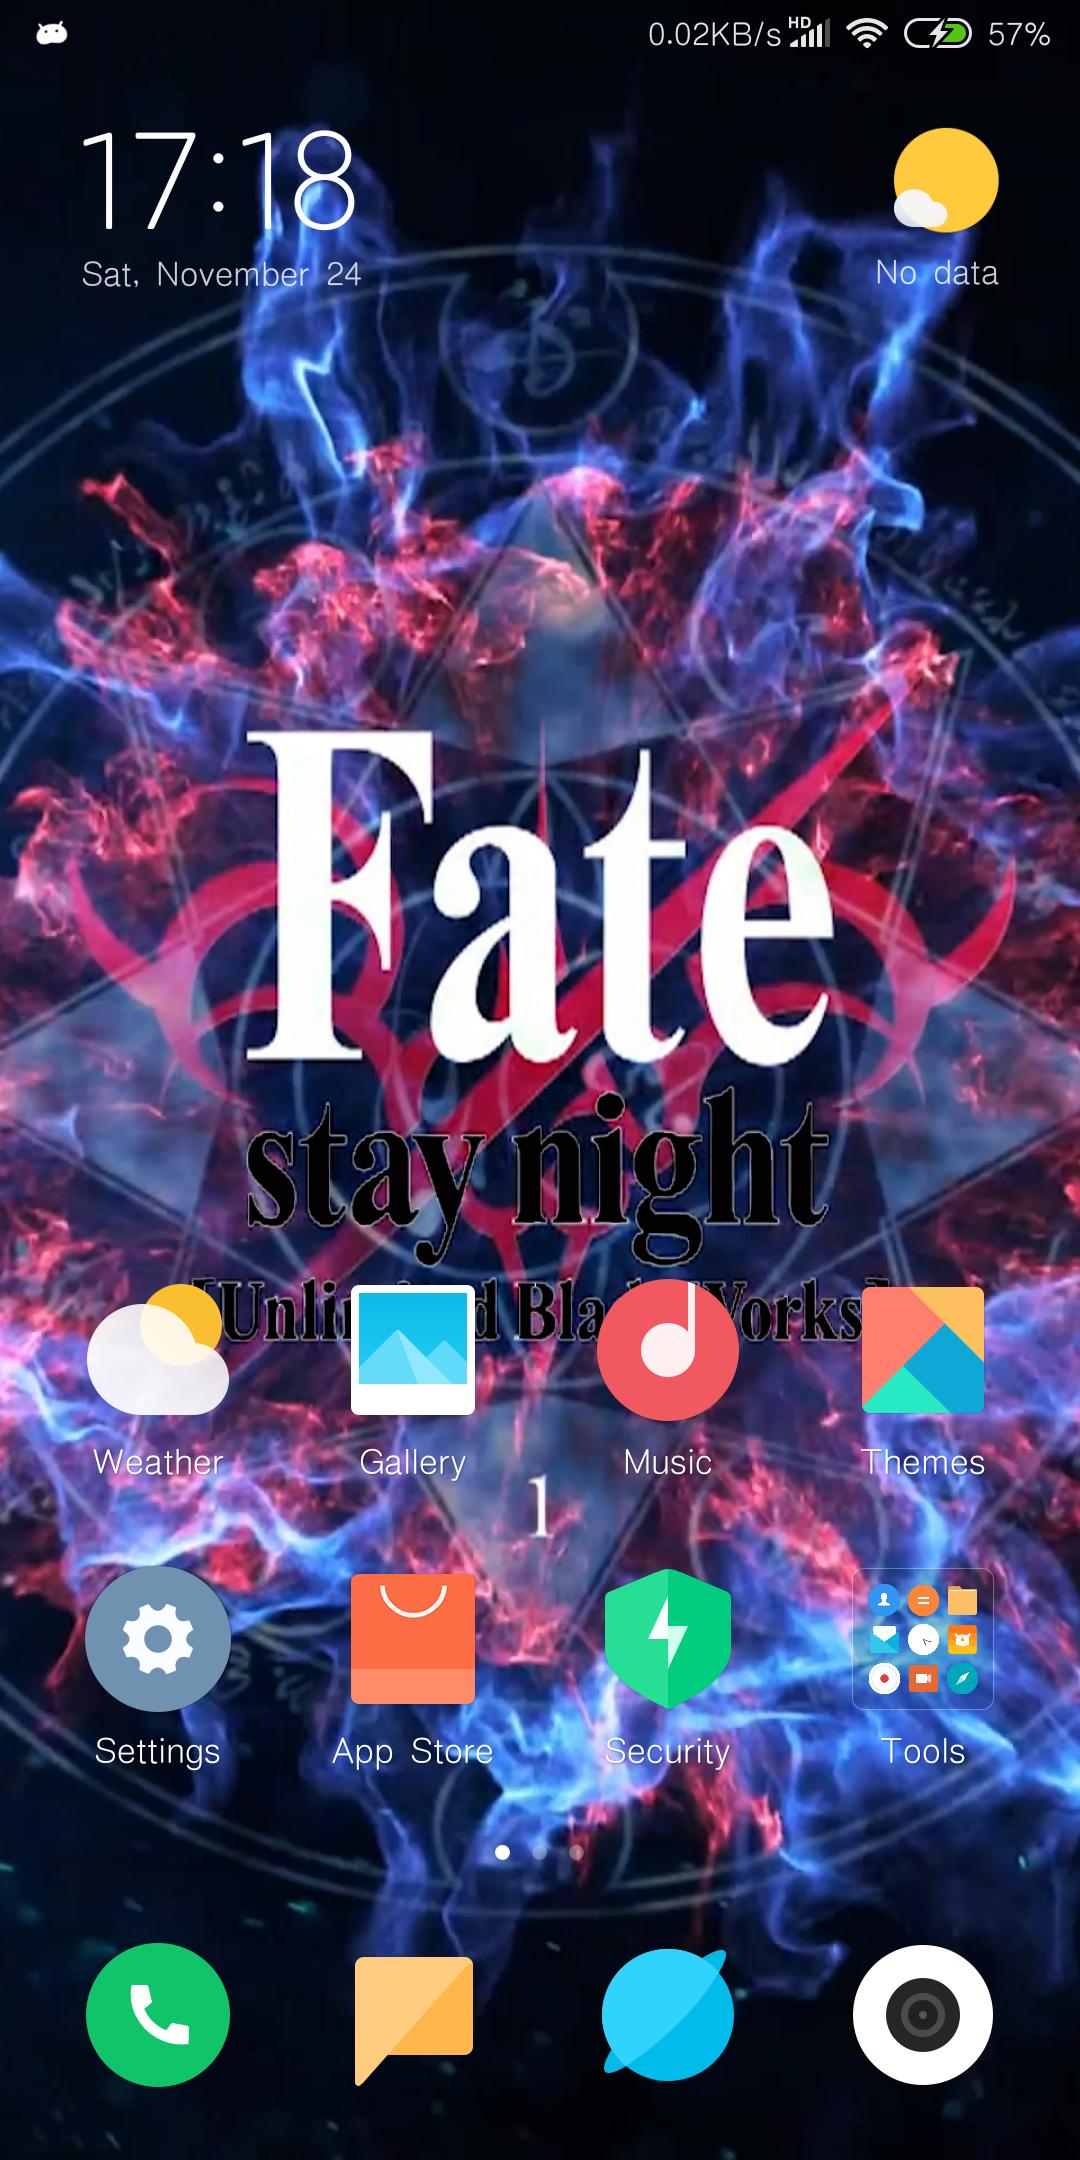 Fate Anime Video Live Wallpaper For Android Apk Download